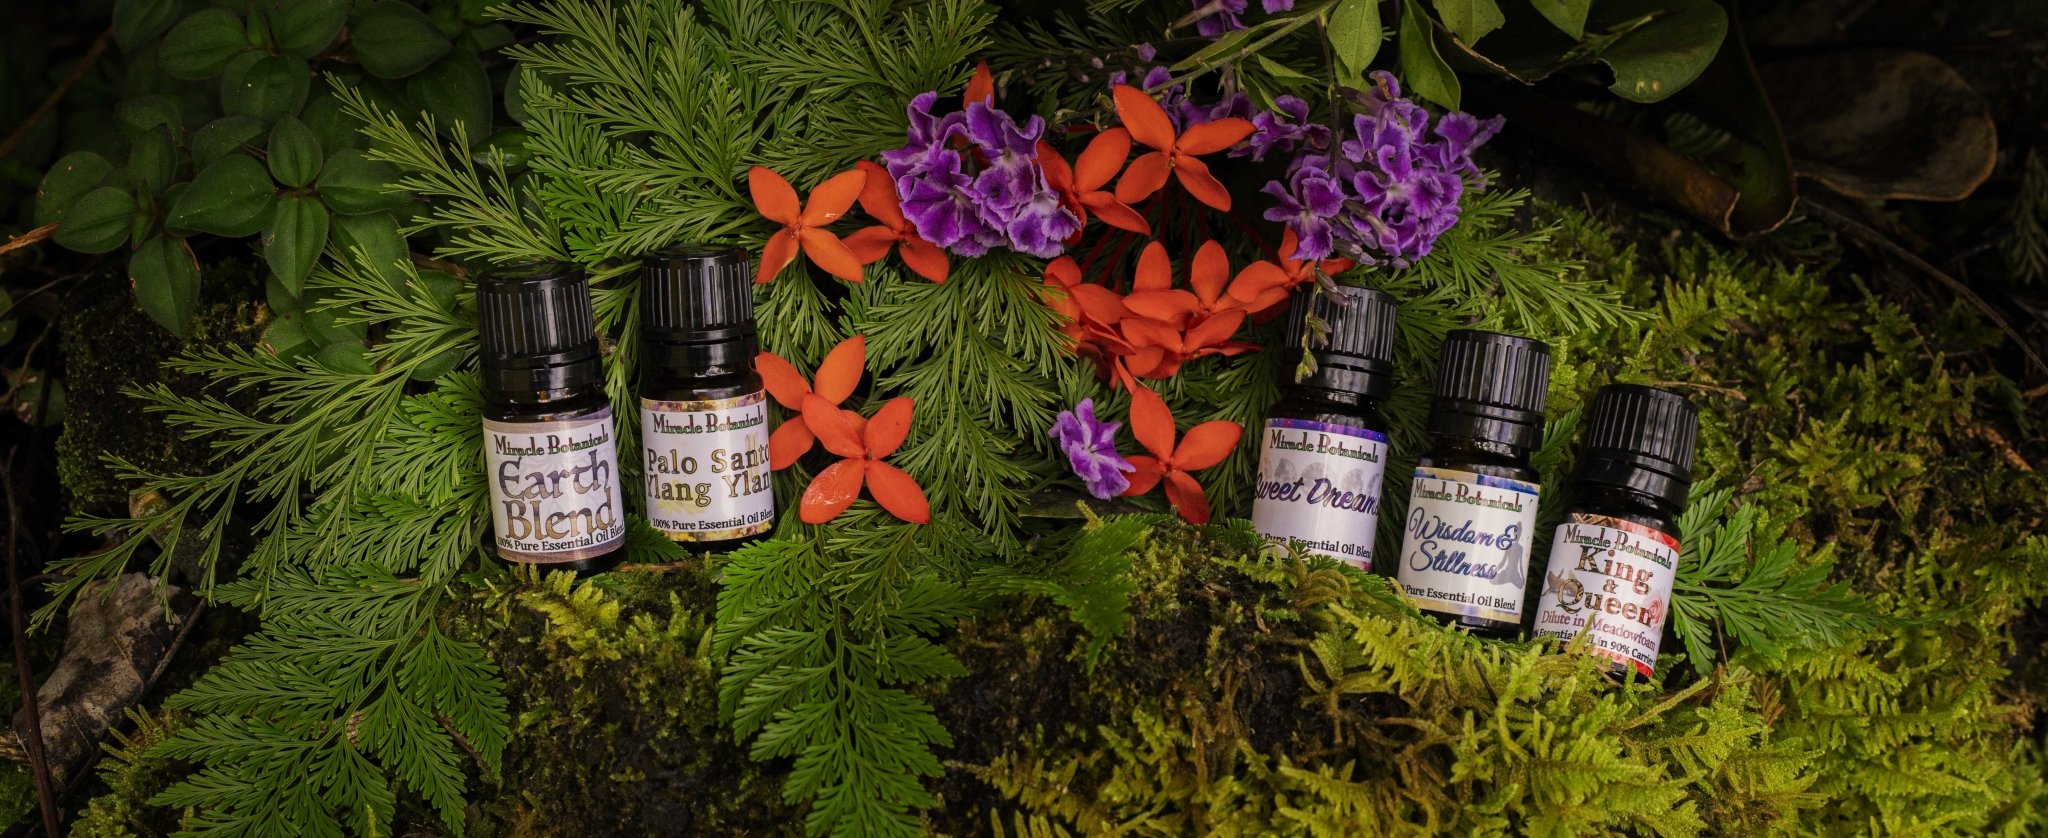 Pure Essential Oil Blends - Miracle Botanicals Essential Oils